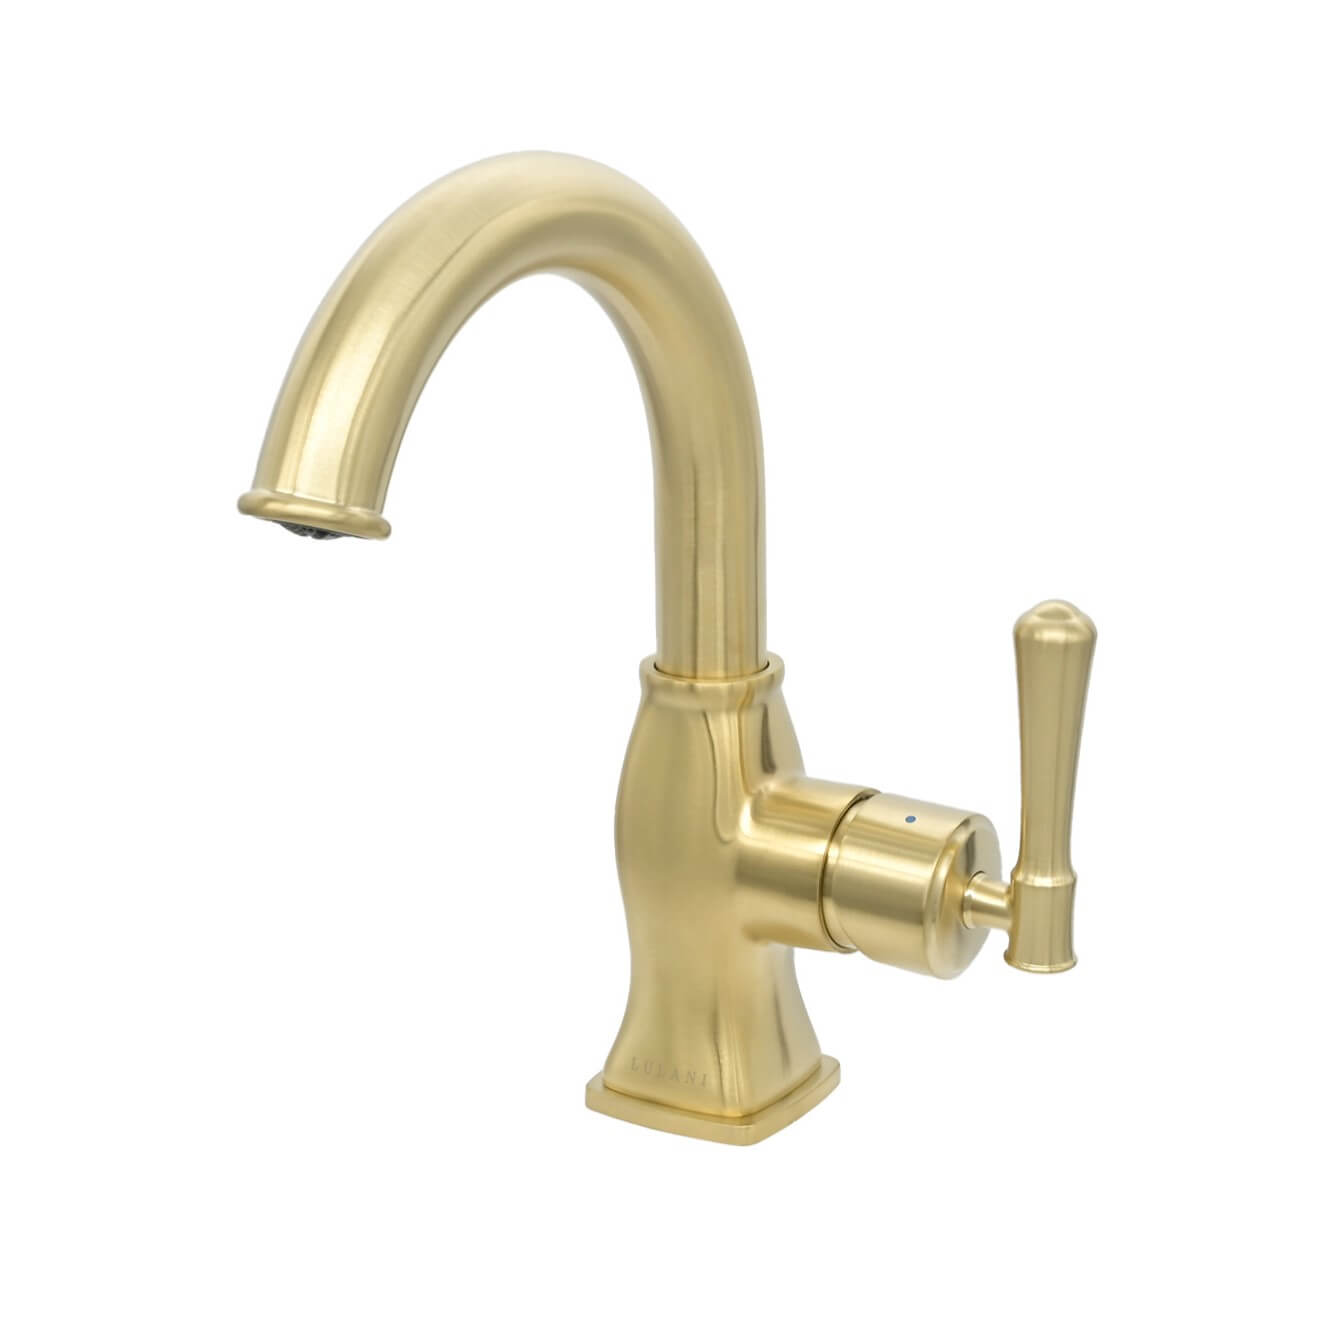 Aurora 1 Handle Single Hole Brass Bathroom Faucet with drain assembly